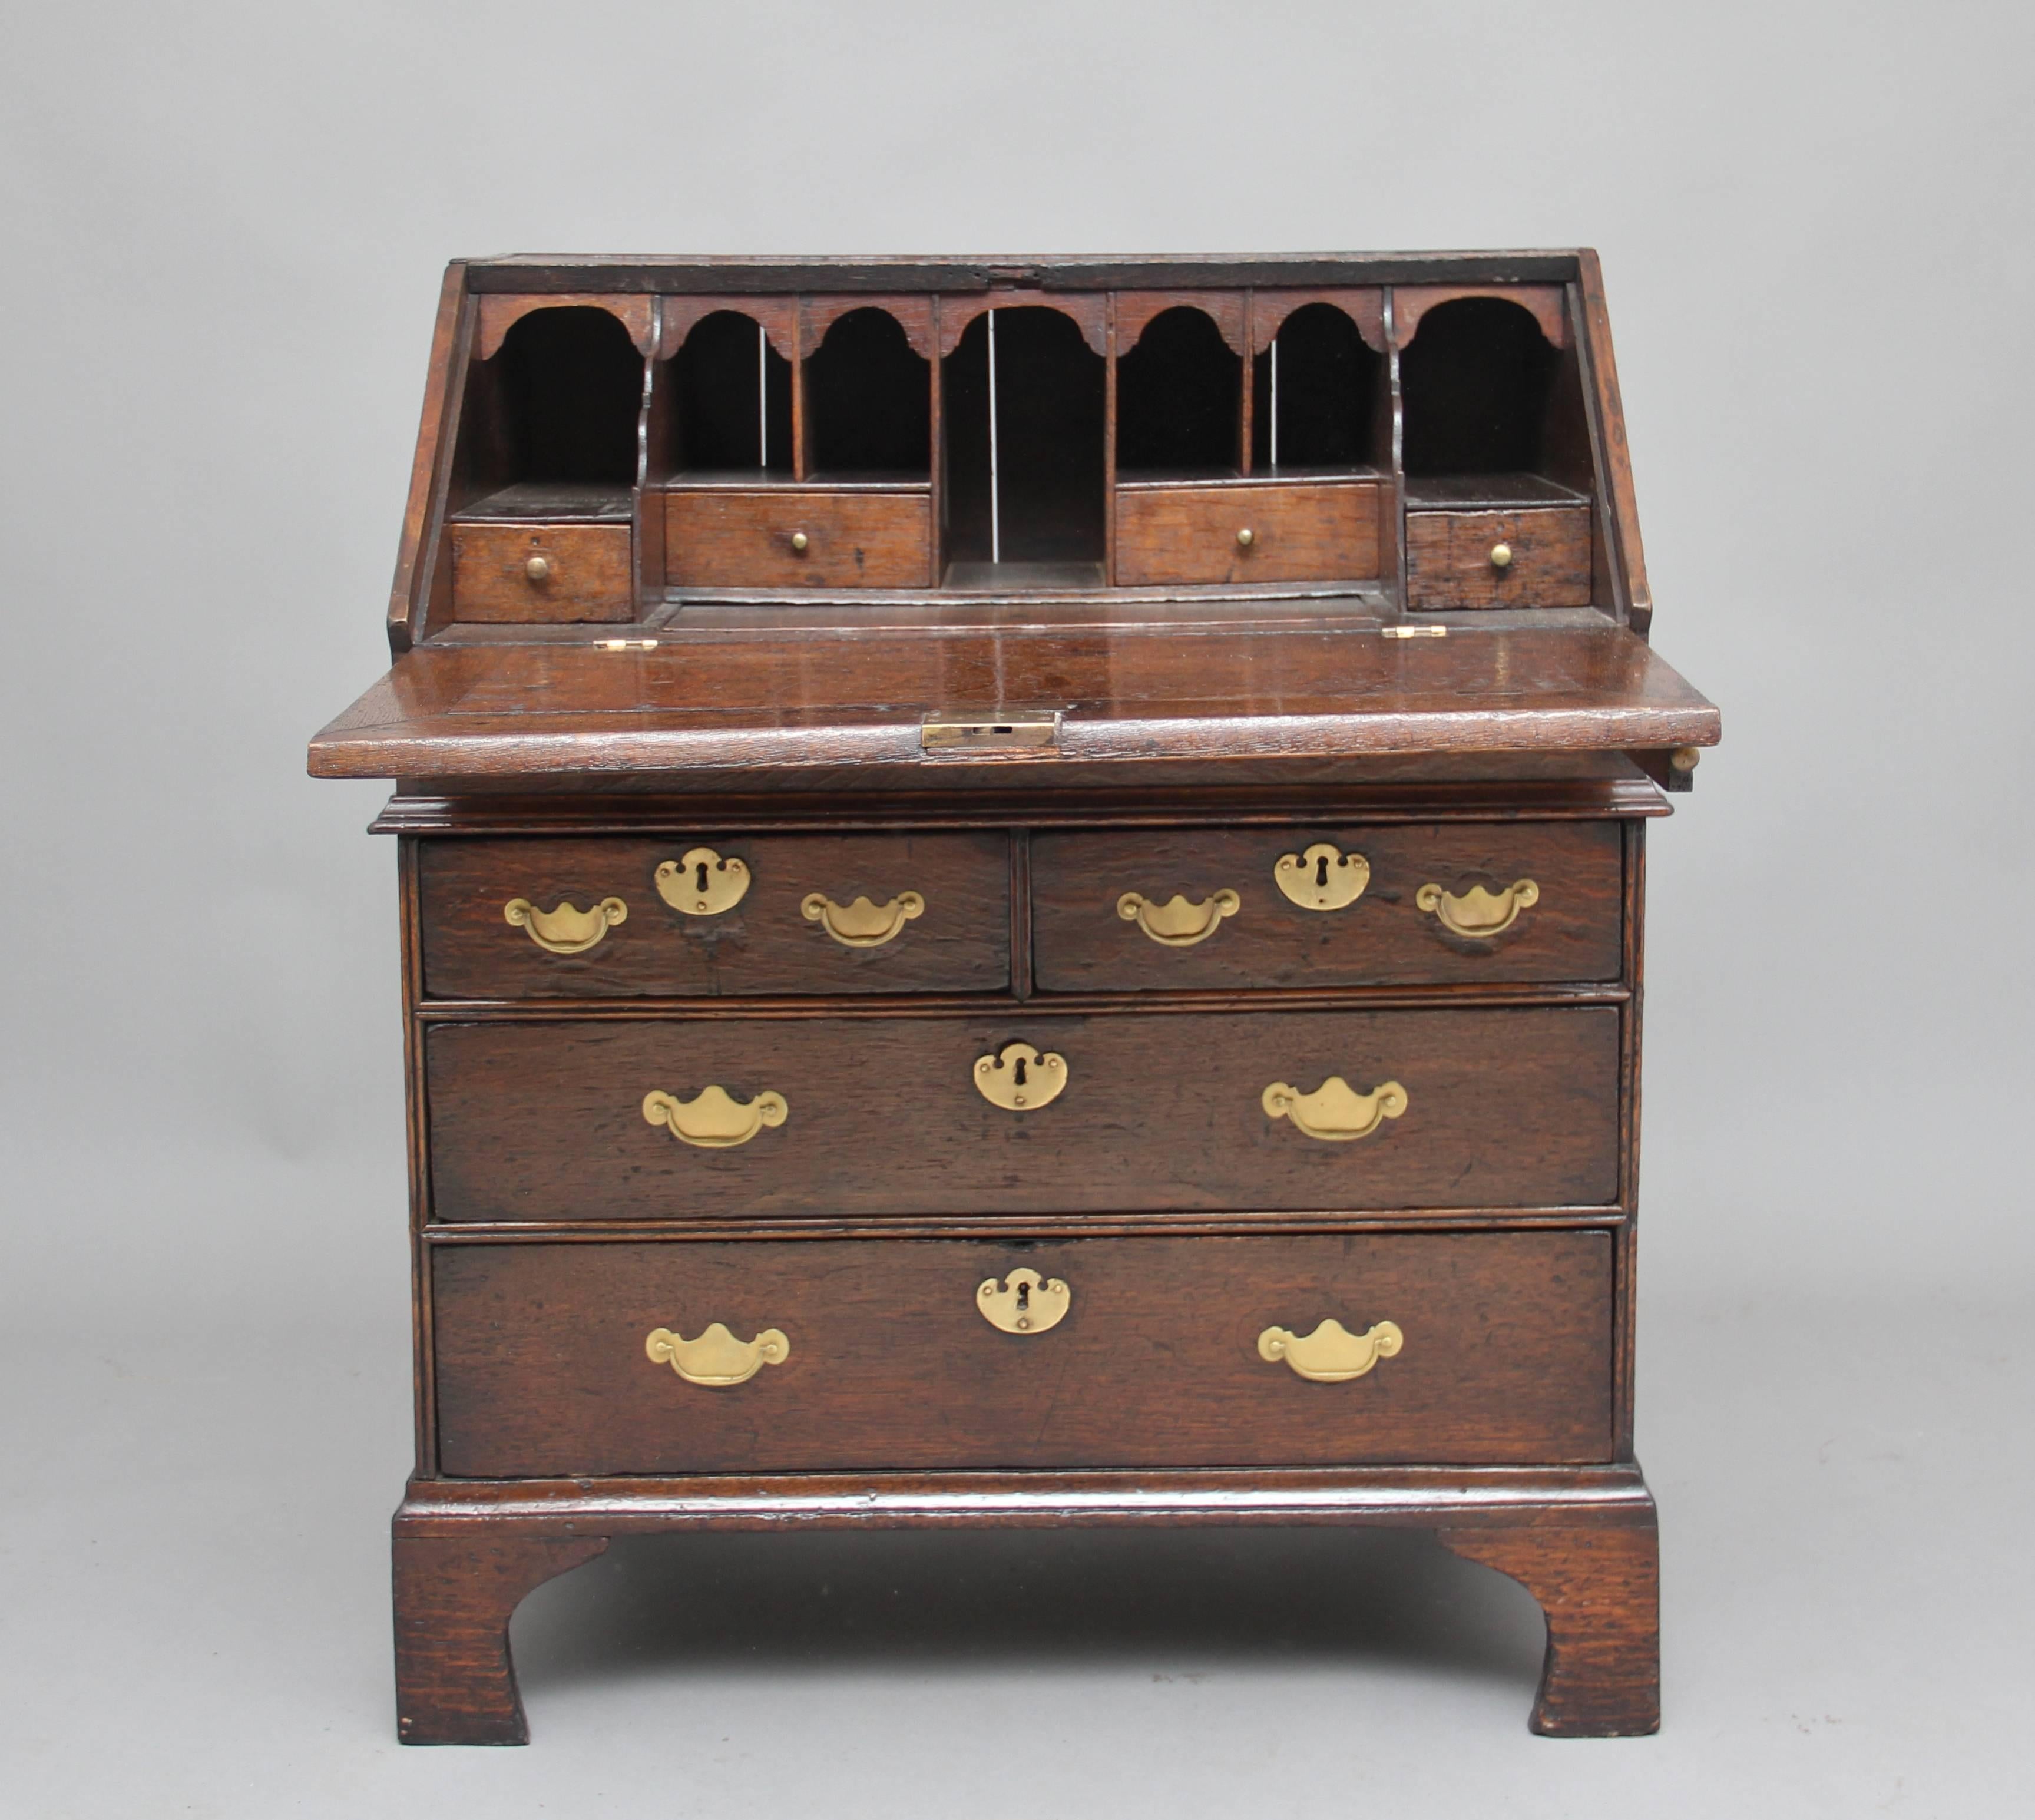 Early 18th Century oak bureau, the fall opening to reveal a lovely fitted interior with various drawers, compartments and a well, the bureau having two short over two long oak lined drawers with brass plate handles and escutcheons, standing on